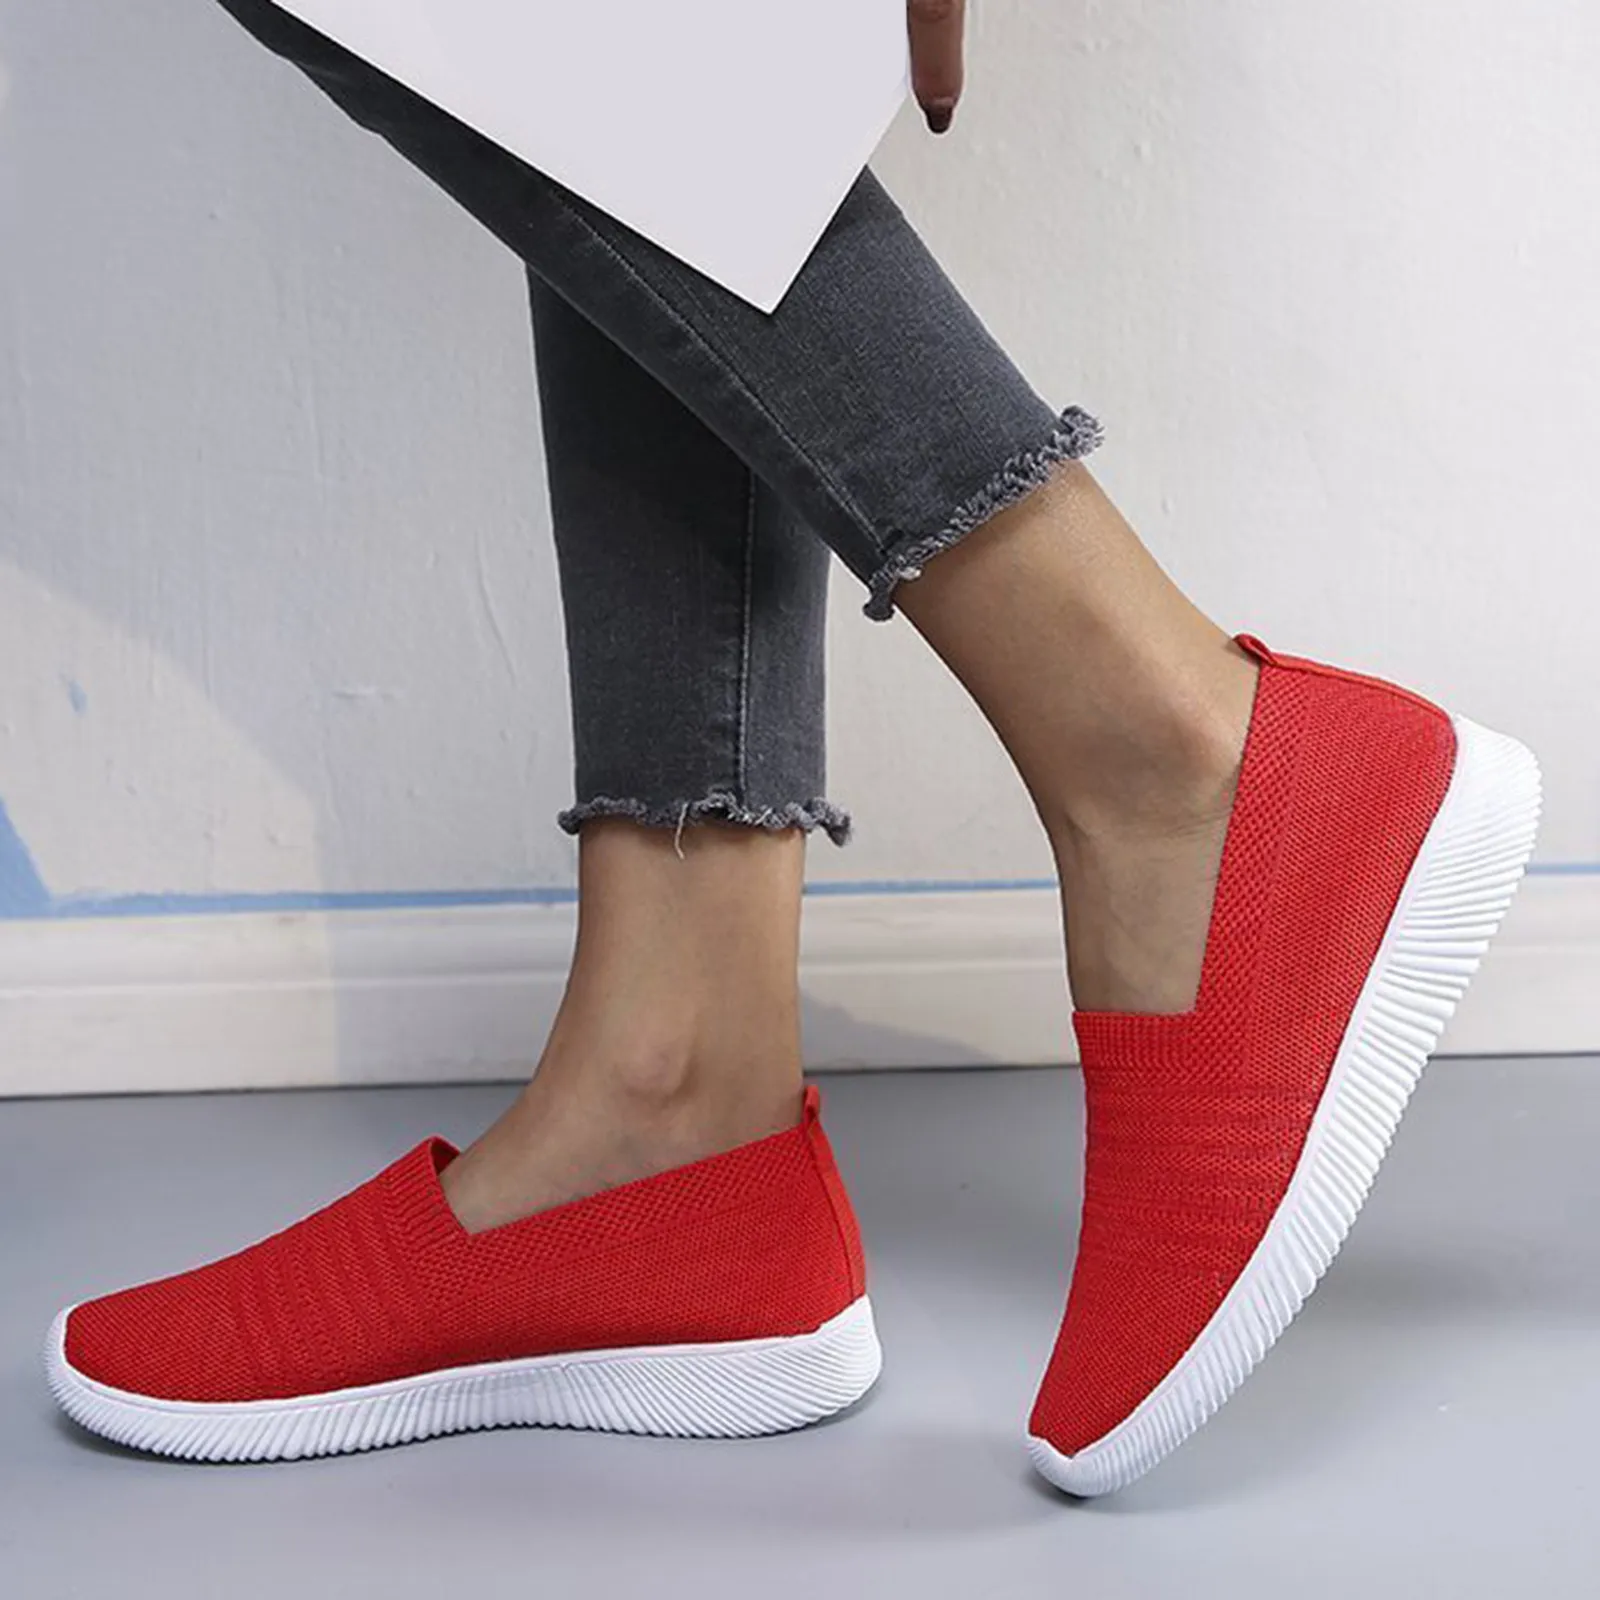 

Vulcanized Sneakers Women Trainers Knitted Sock Sneakers Ladies Slip-on No-Slip Shoes Casual Walking Flat Shoes Zapatillas Mujer